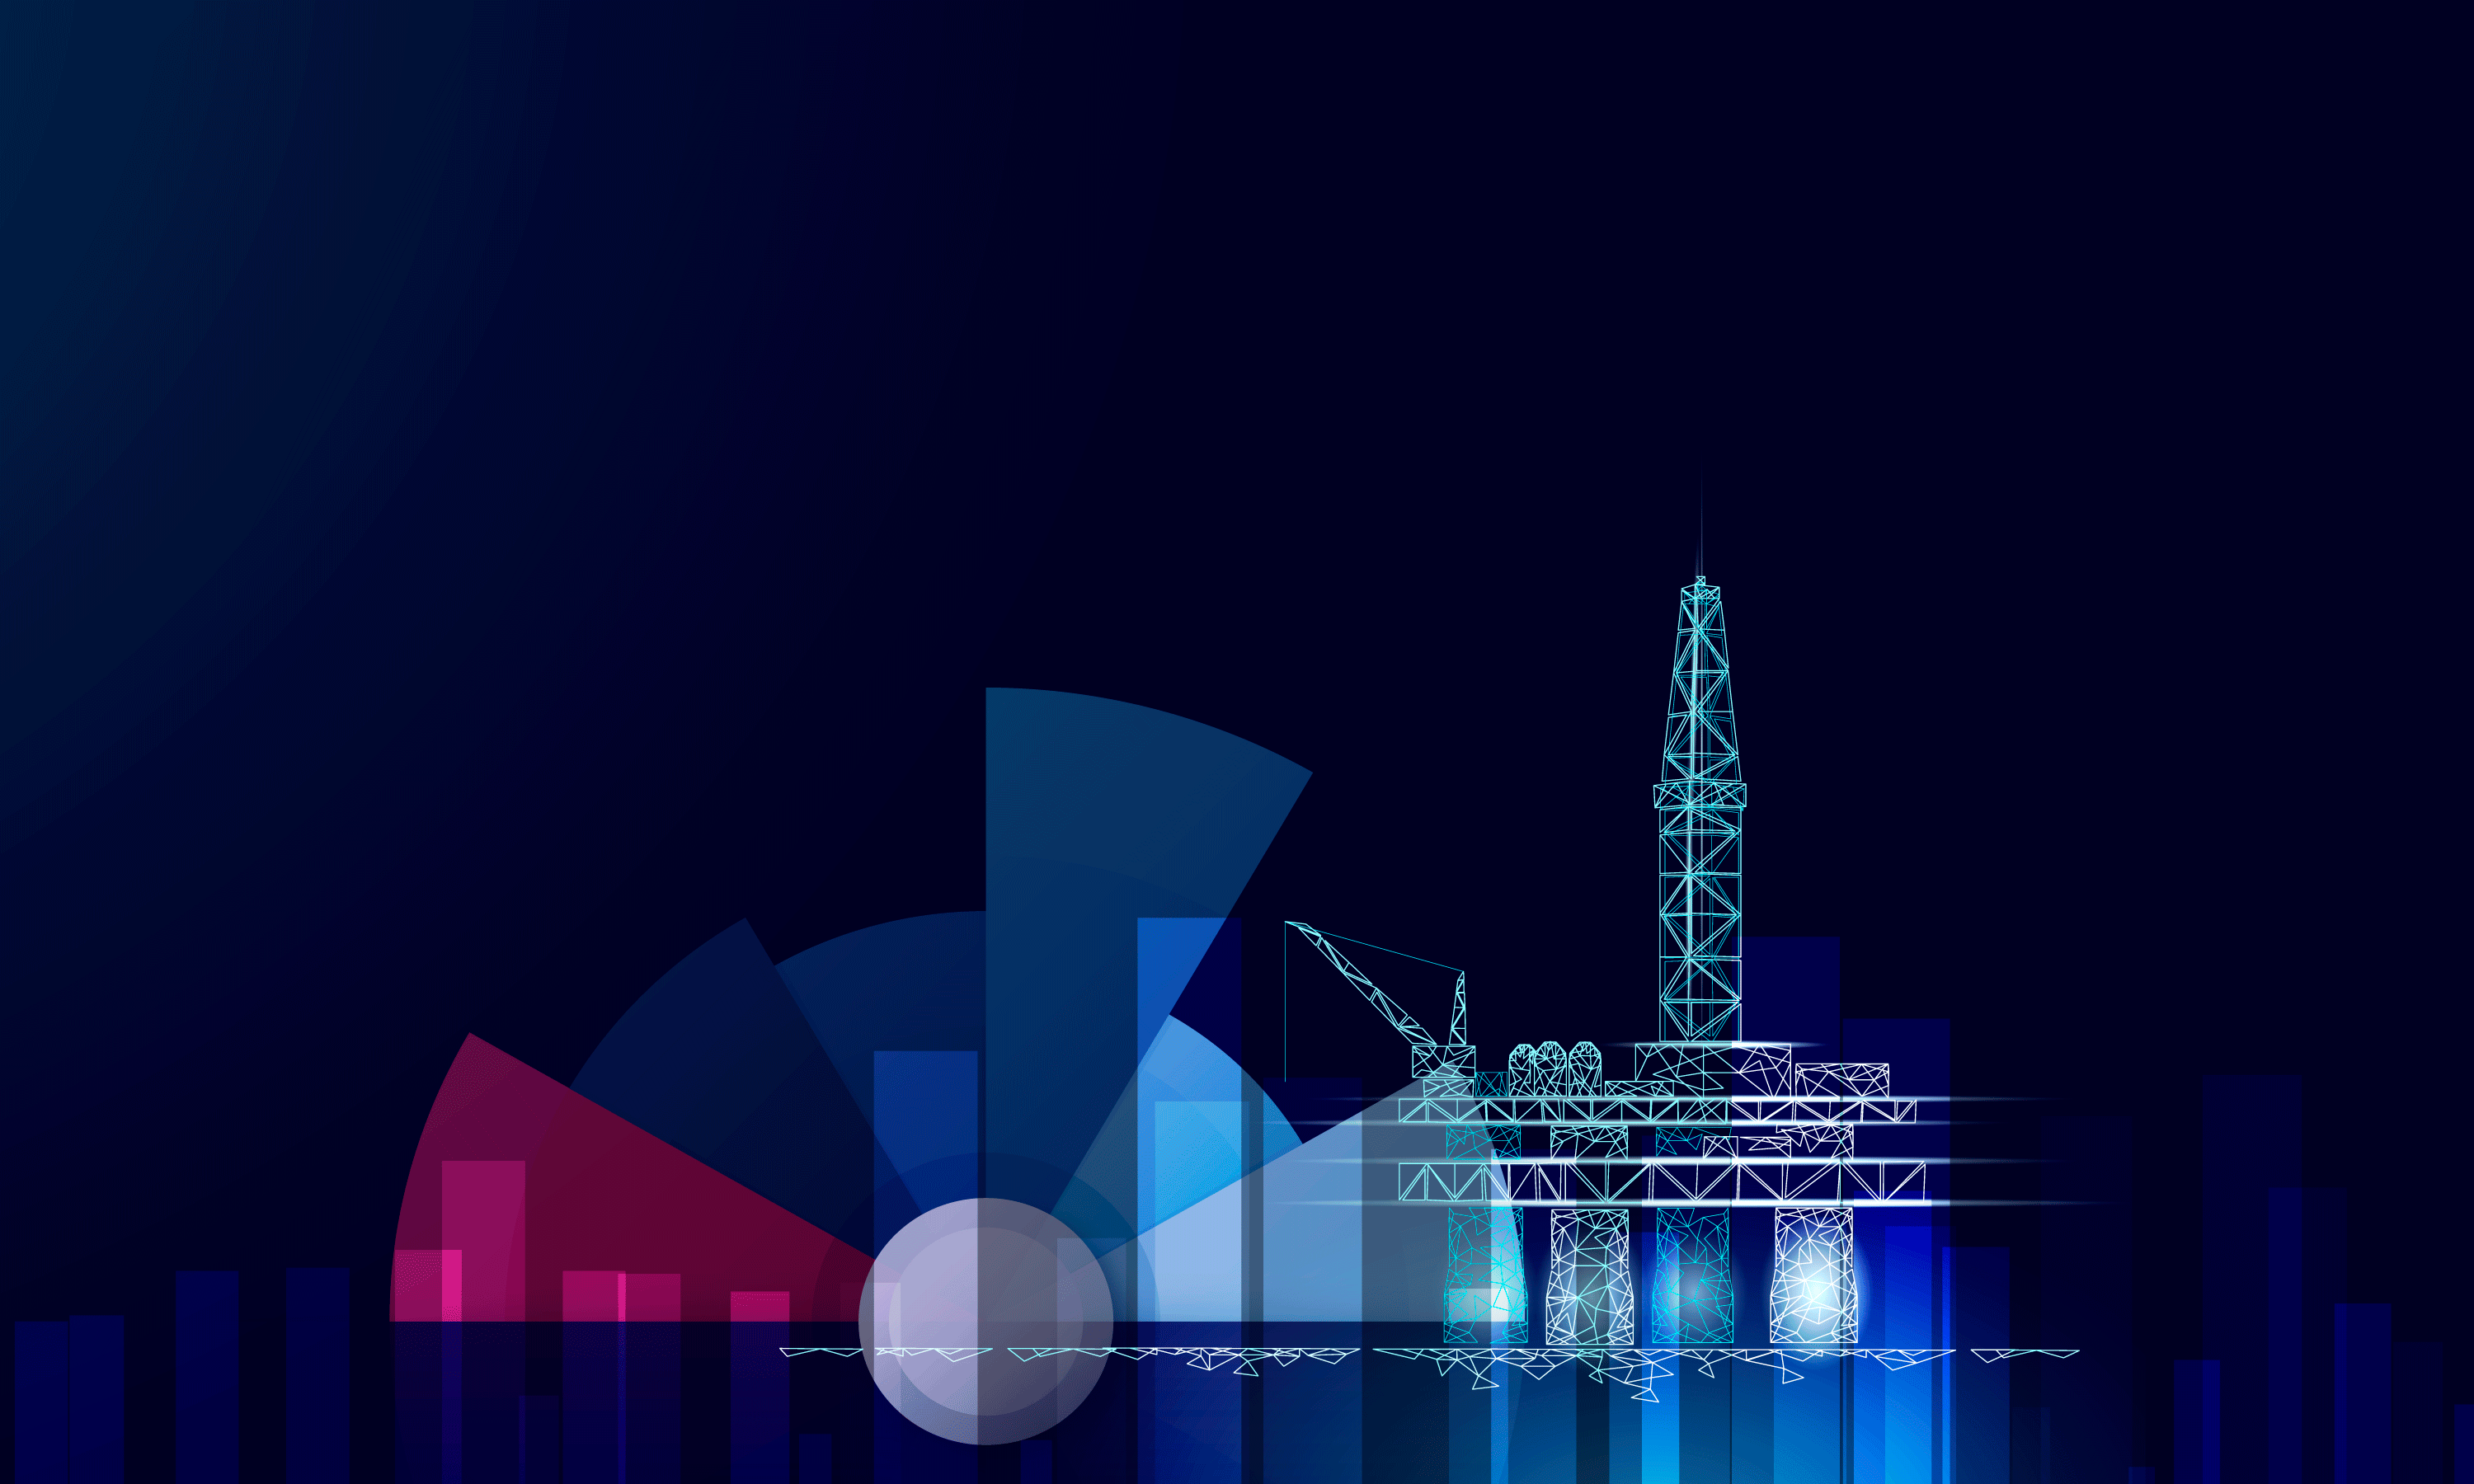 Weekly Global Offshore Rig Counts 2021